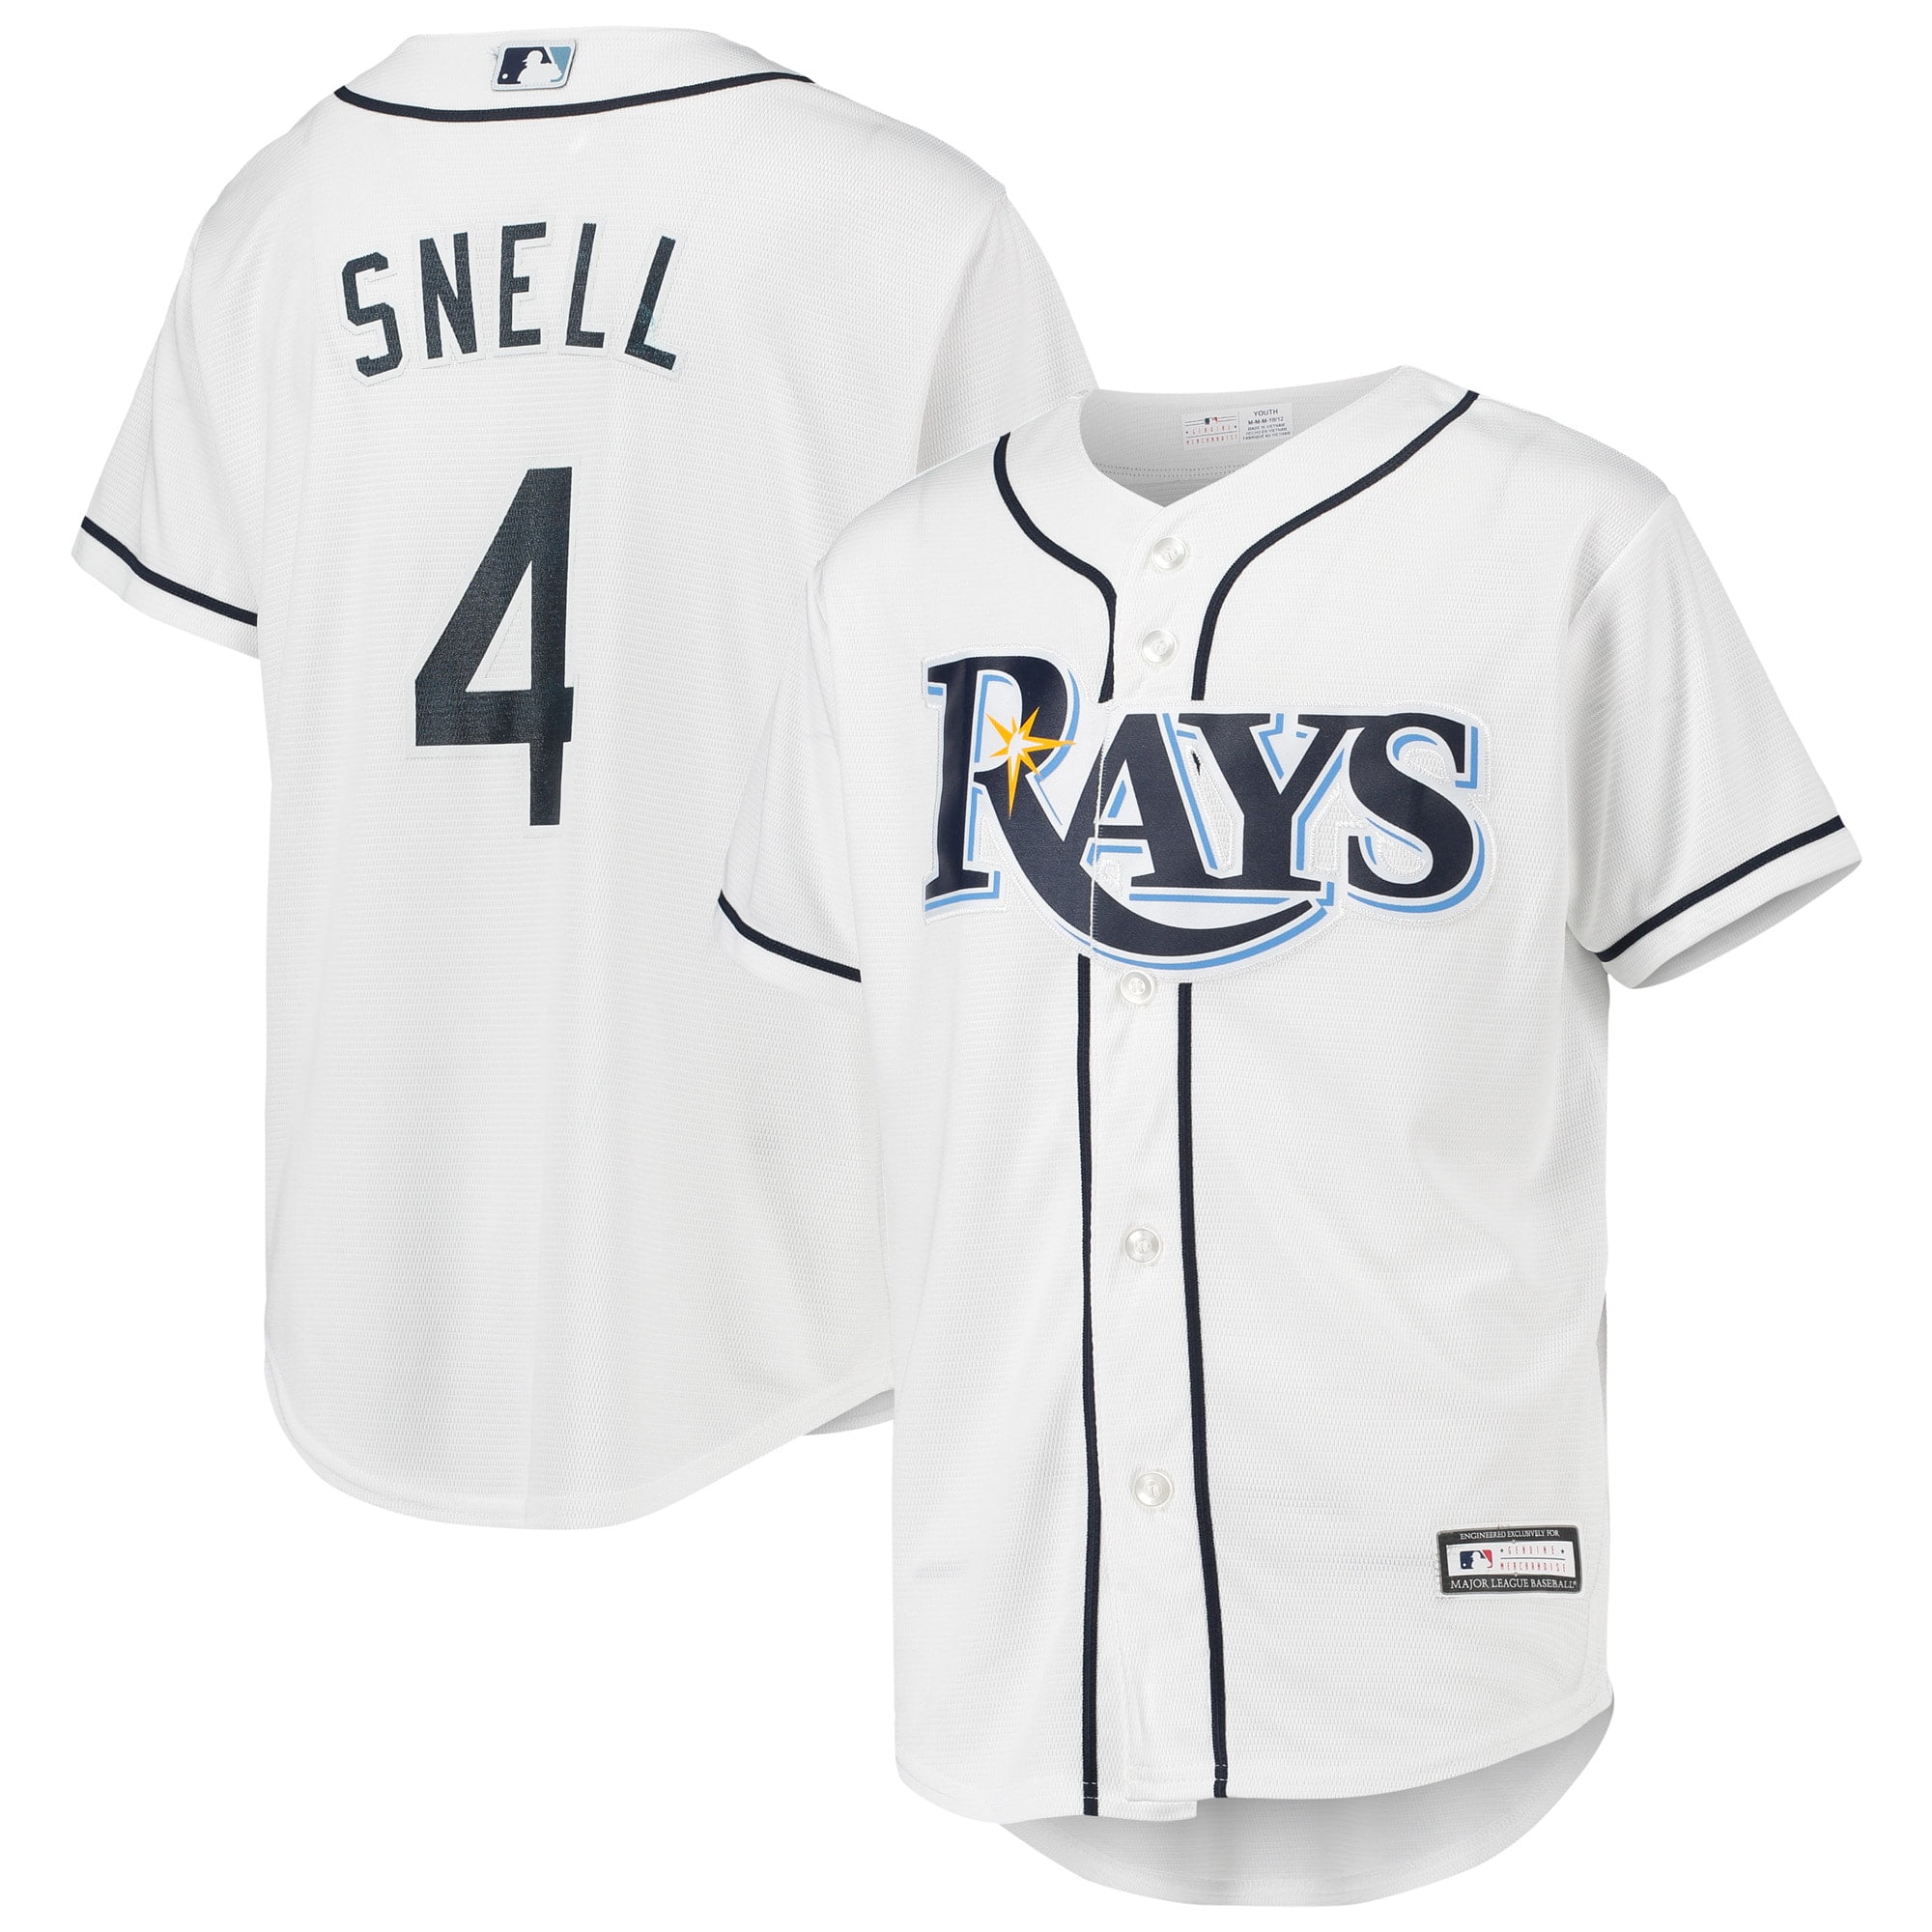 blake snell youth jersey